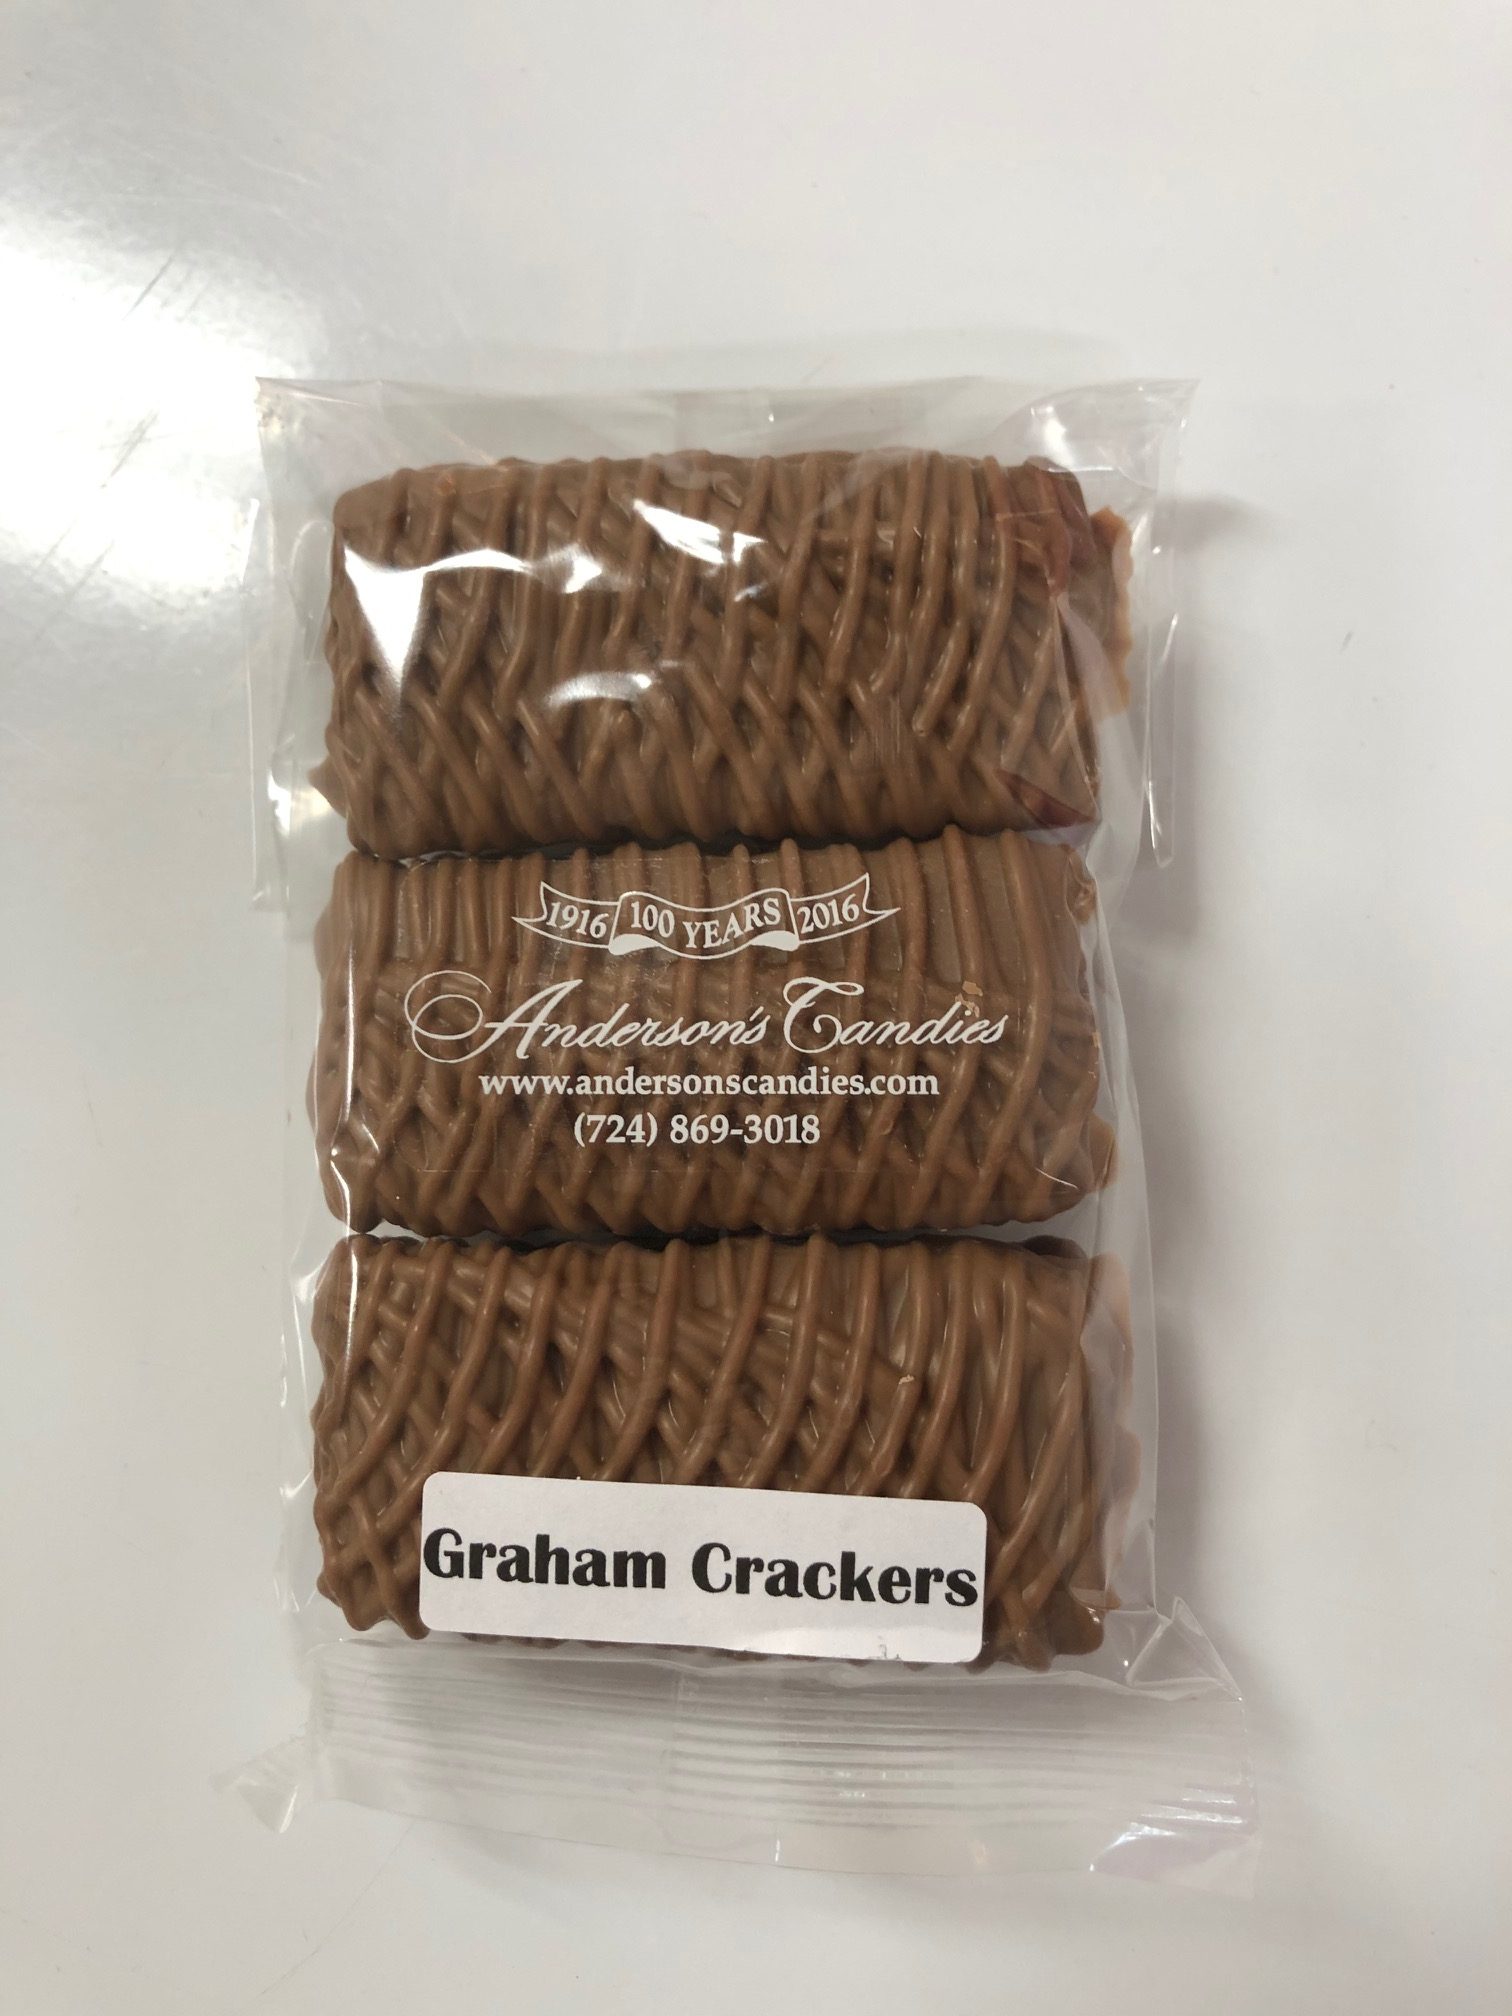 Chocolate Covered Graham Crackers - Anderson's Candies - Fundraising